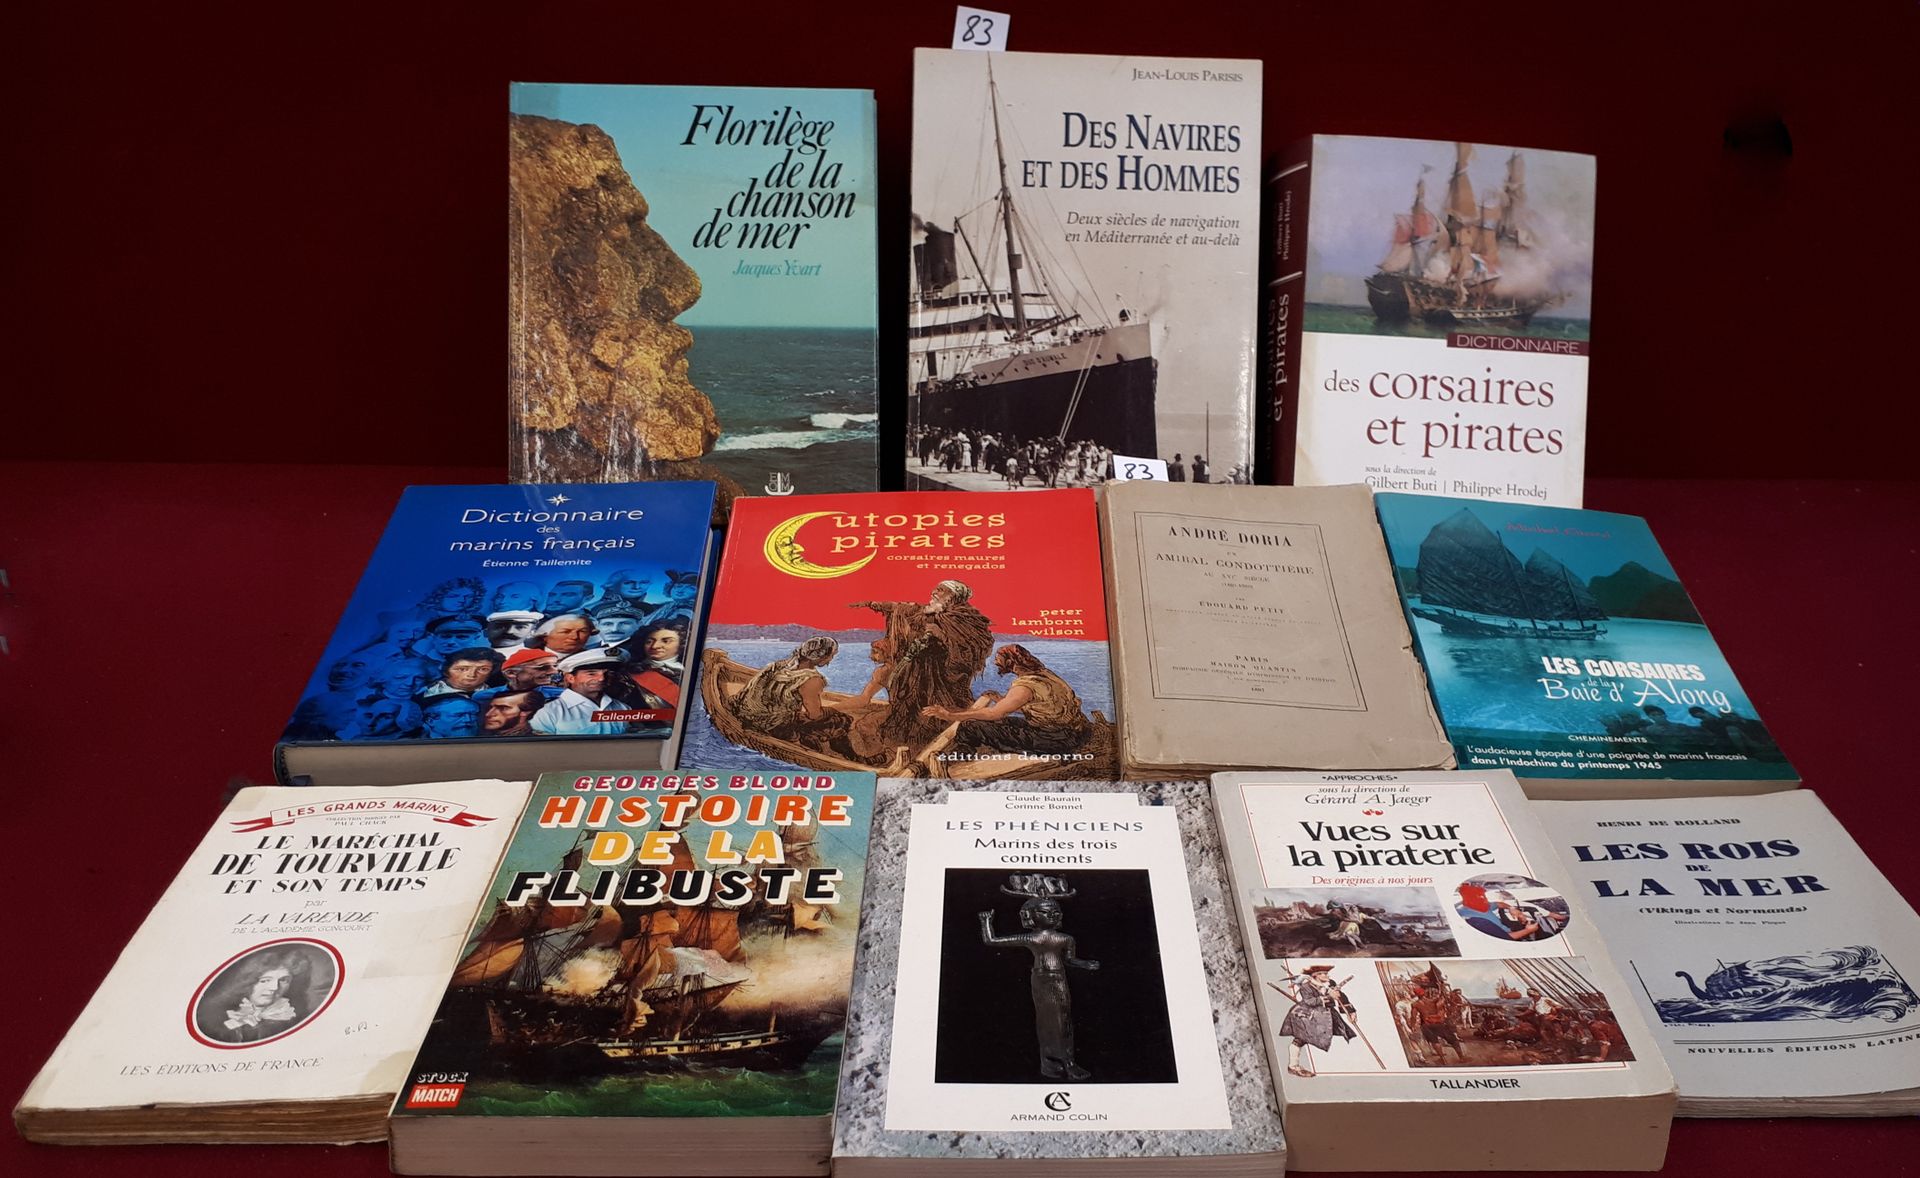 La Mer, les Pirates lot of 12 books on piracy, sailors including: an admiral con&hellip;